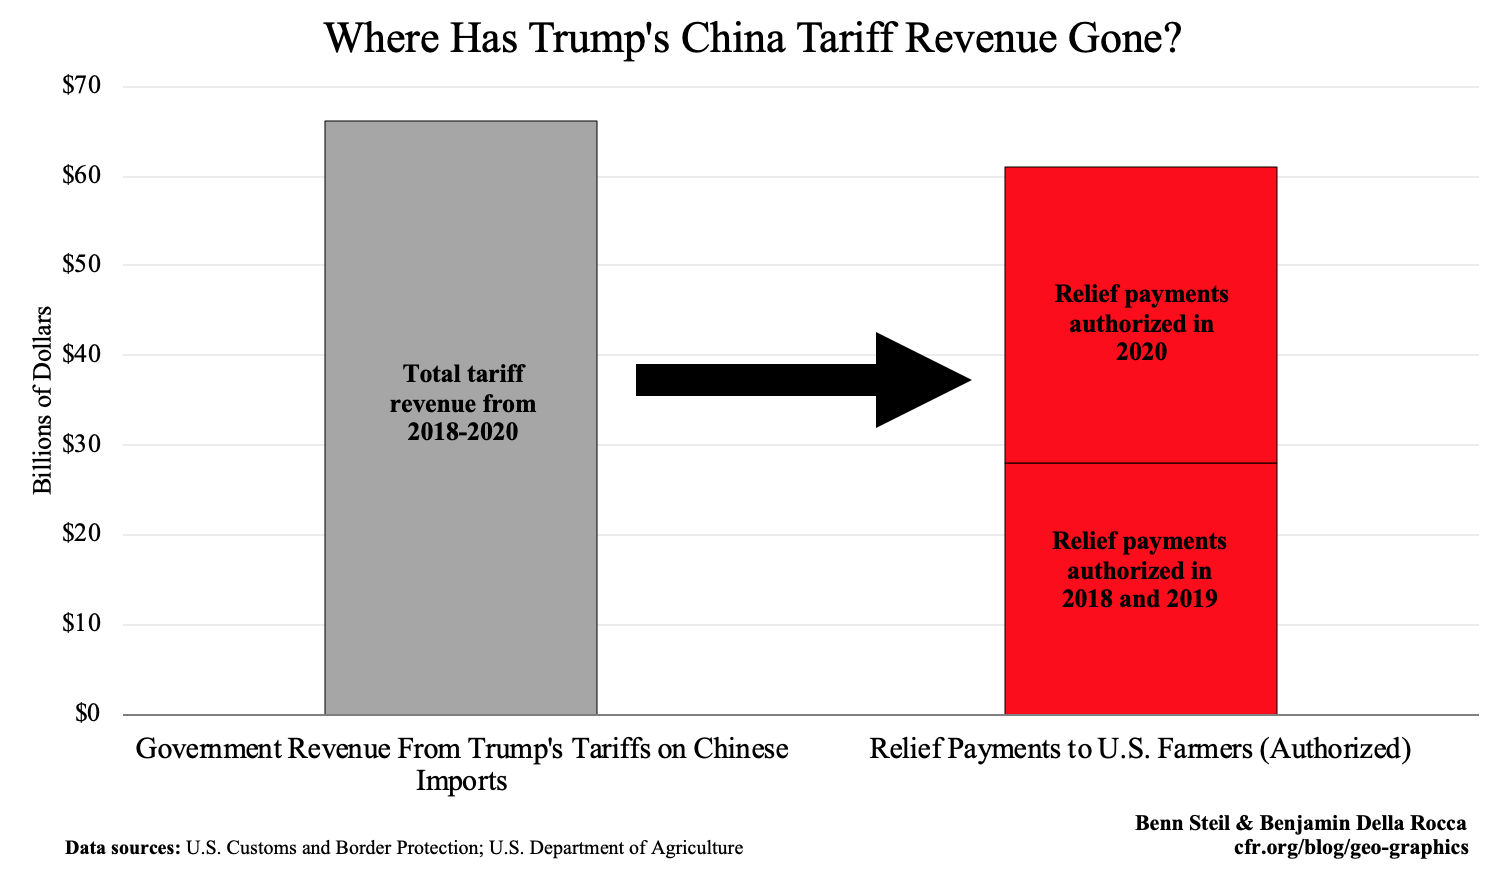 92 Percent of Trump’s China Tariff Proceeds Has Gone to Bail Out Angry Farmers